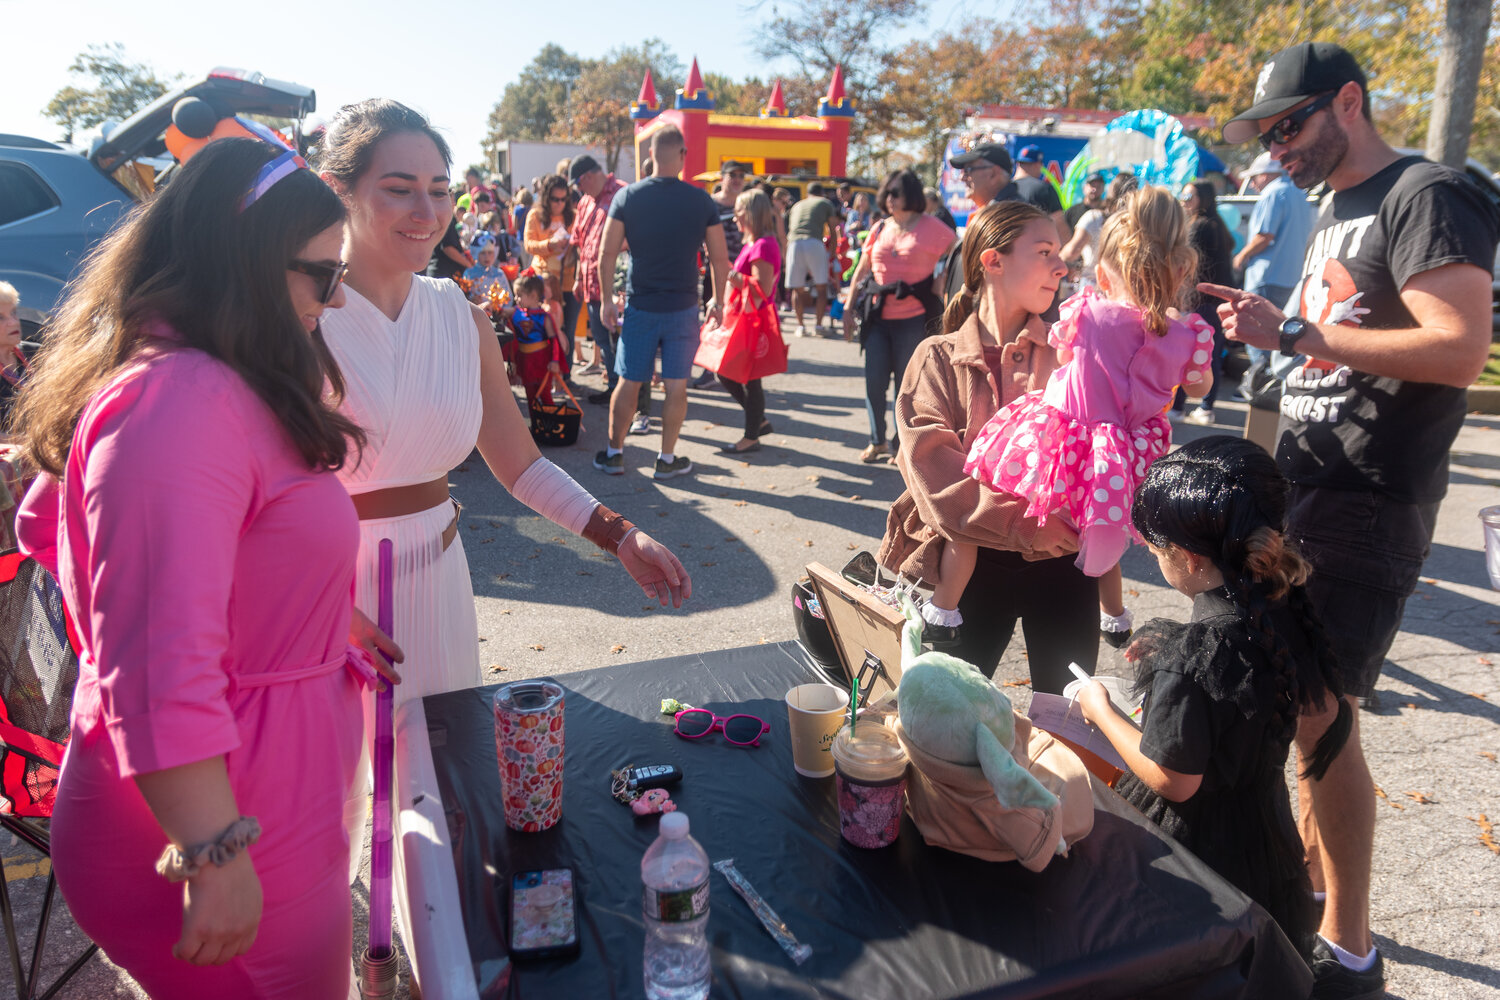 Crowds gathered at Seamans Neck Park in Seaford to participate in Trunk-or-Treat.